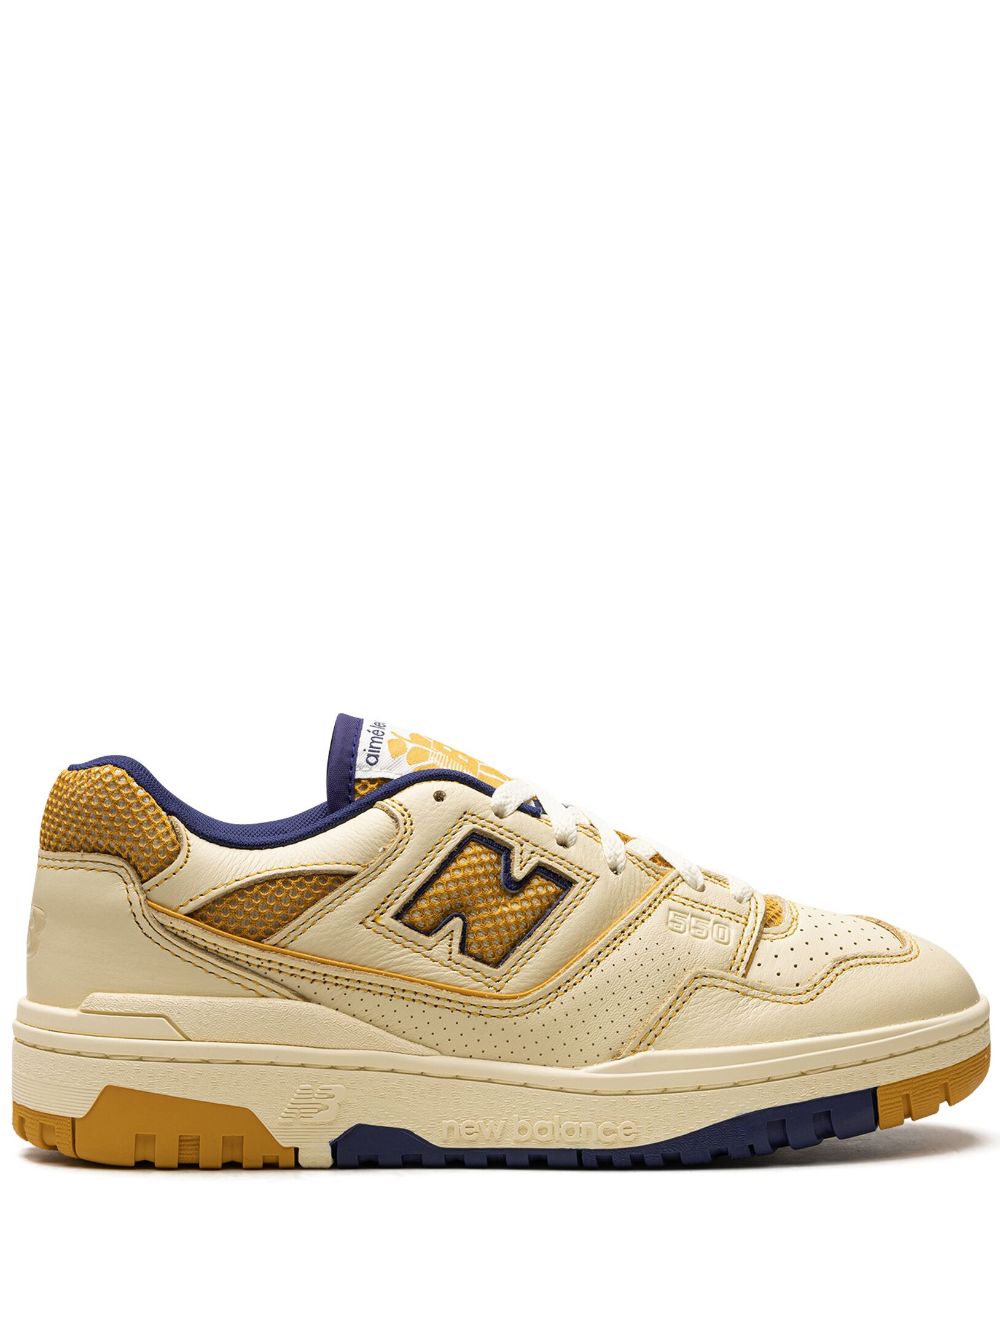 New Balance x Ald 550 "Yellow Blue" sneakers